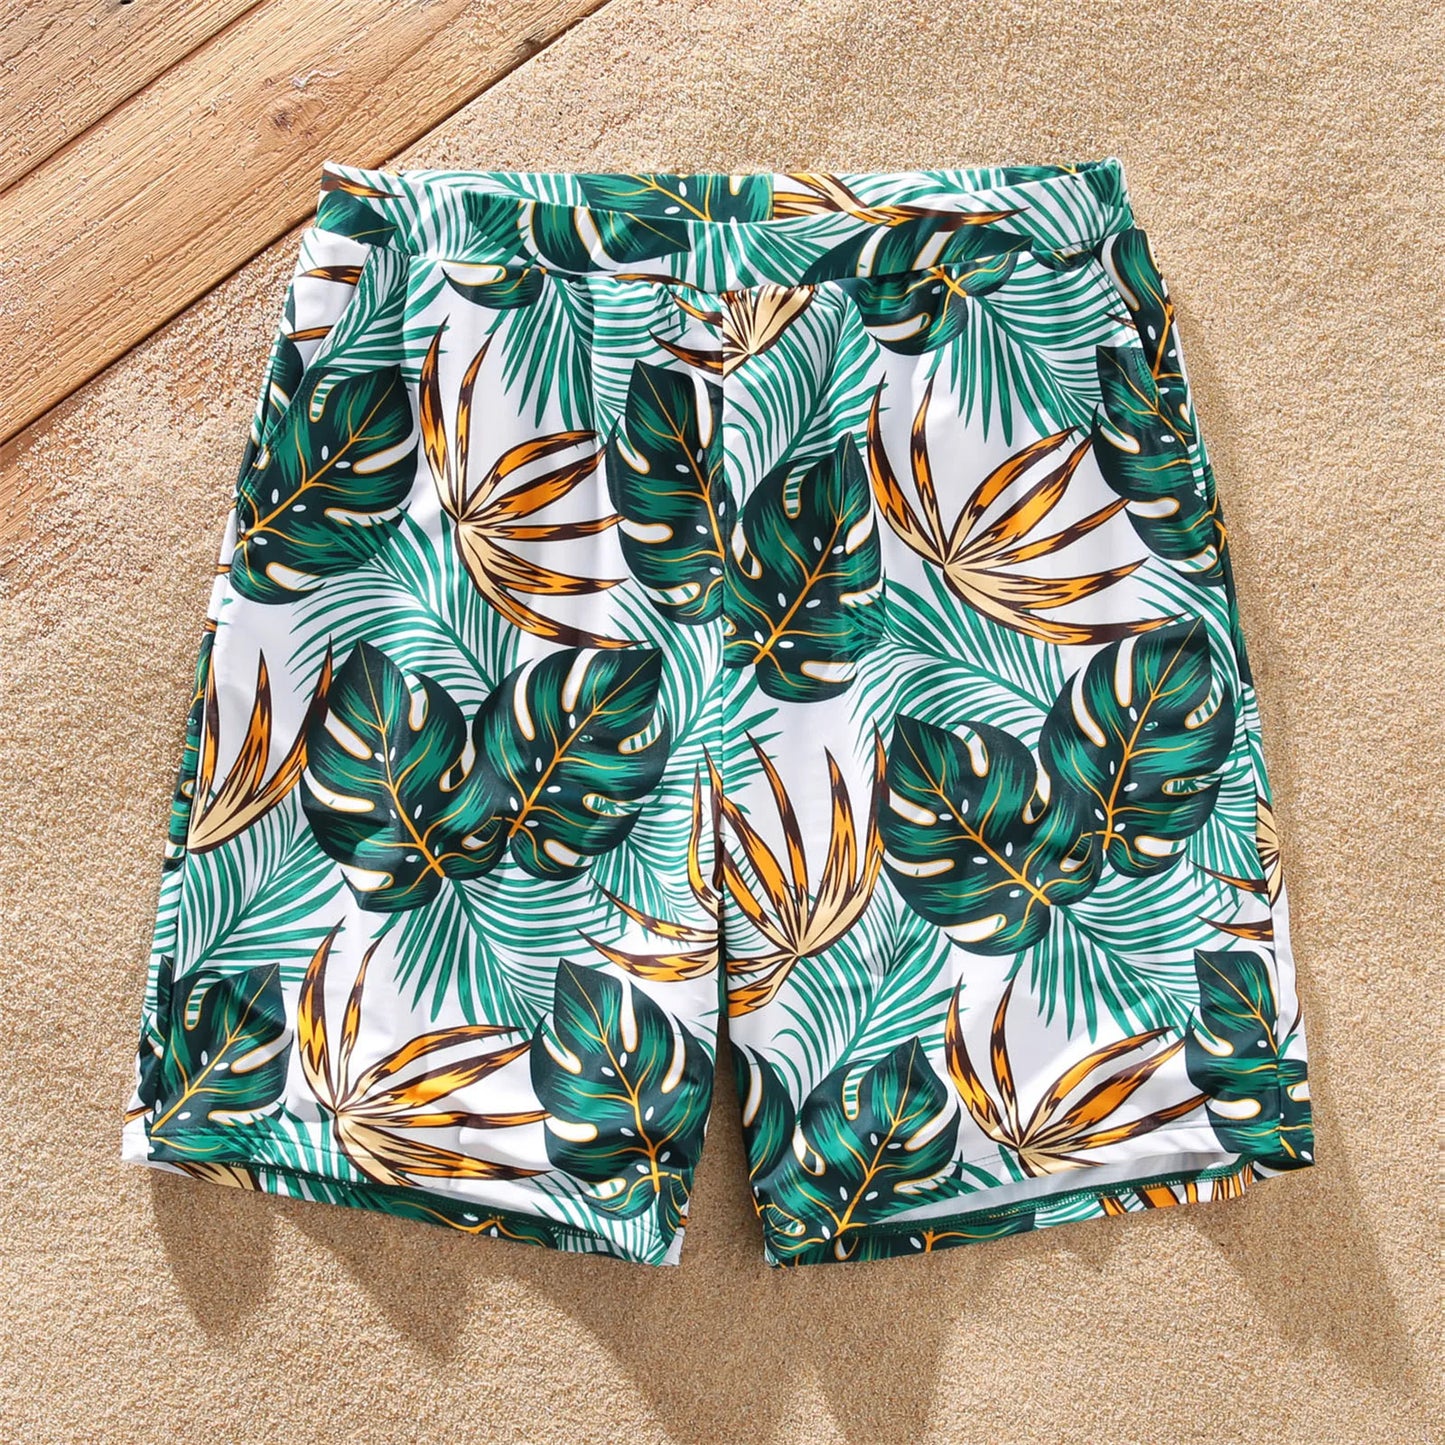 Family Matching! Palm Leaf One Piece Swimsuits & Trunks